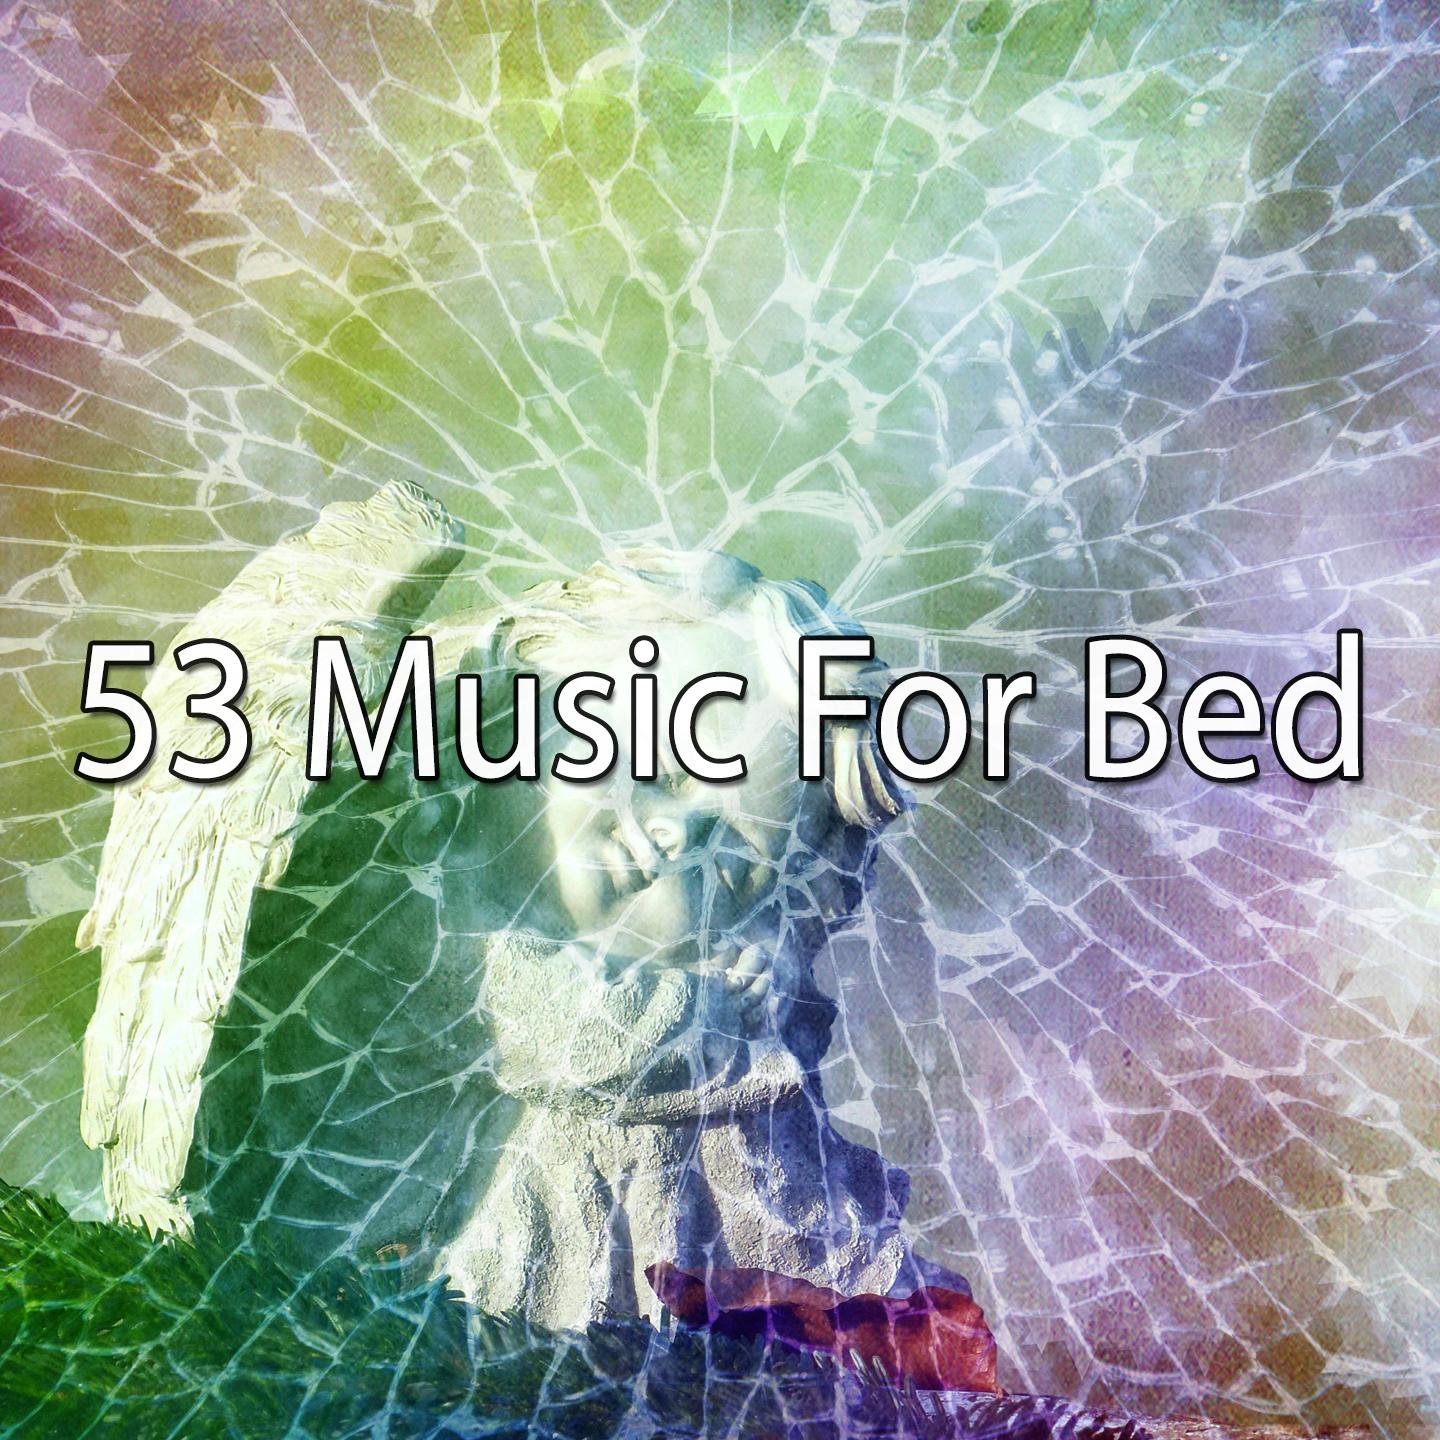 53 Music for Bed